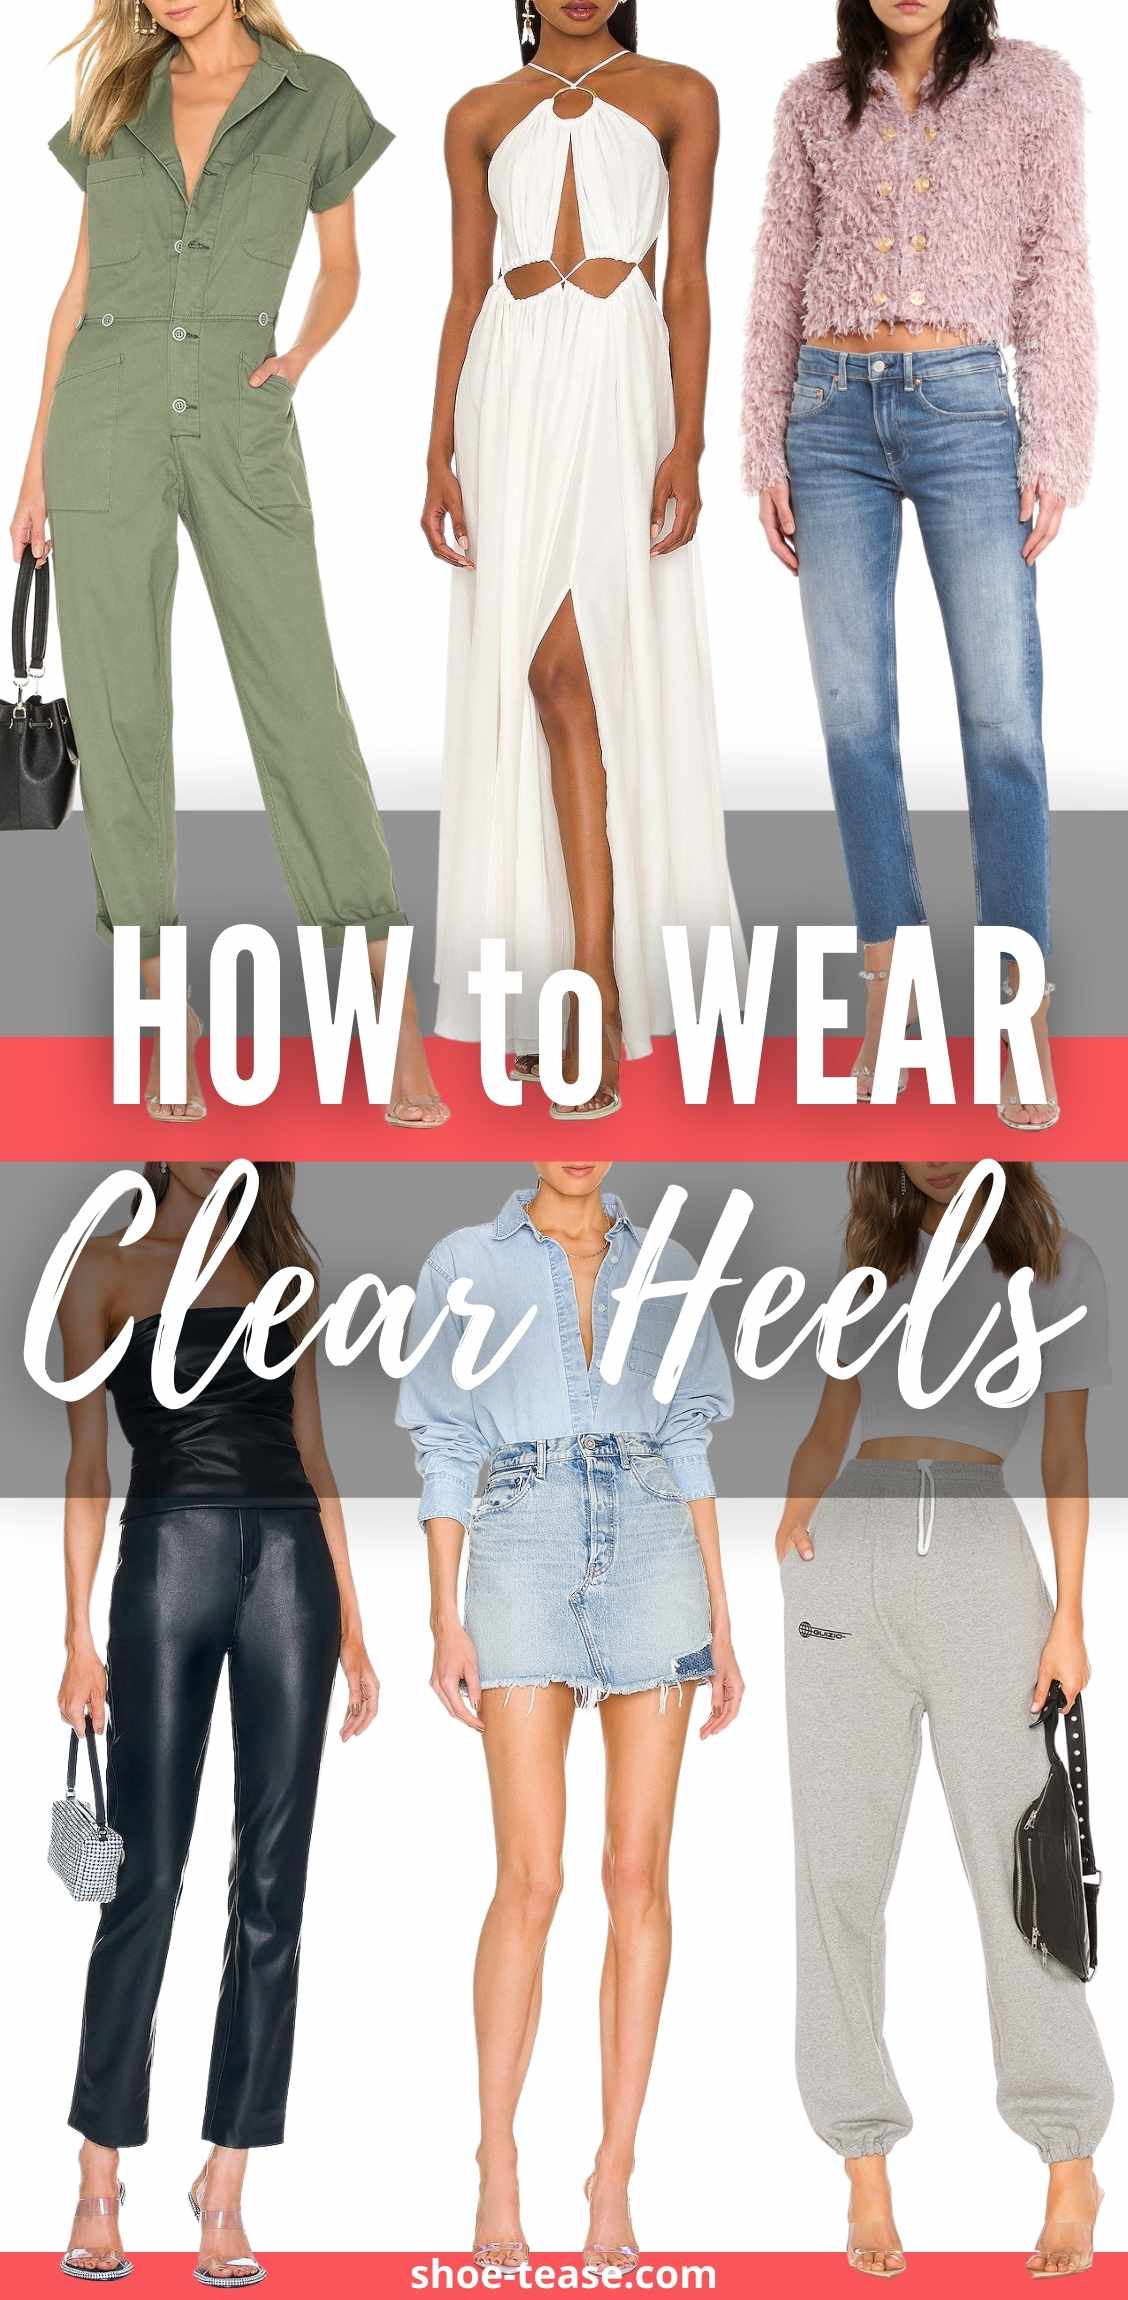 Collage of 6 women wearing different clear heel outfits under text reading how to wear clear heels.